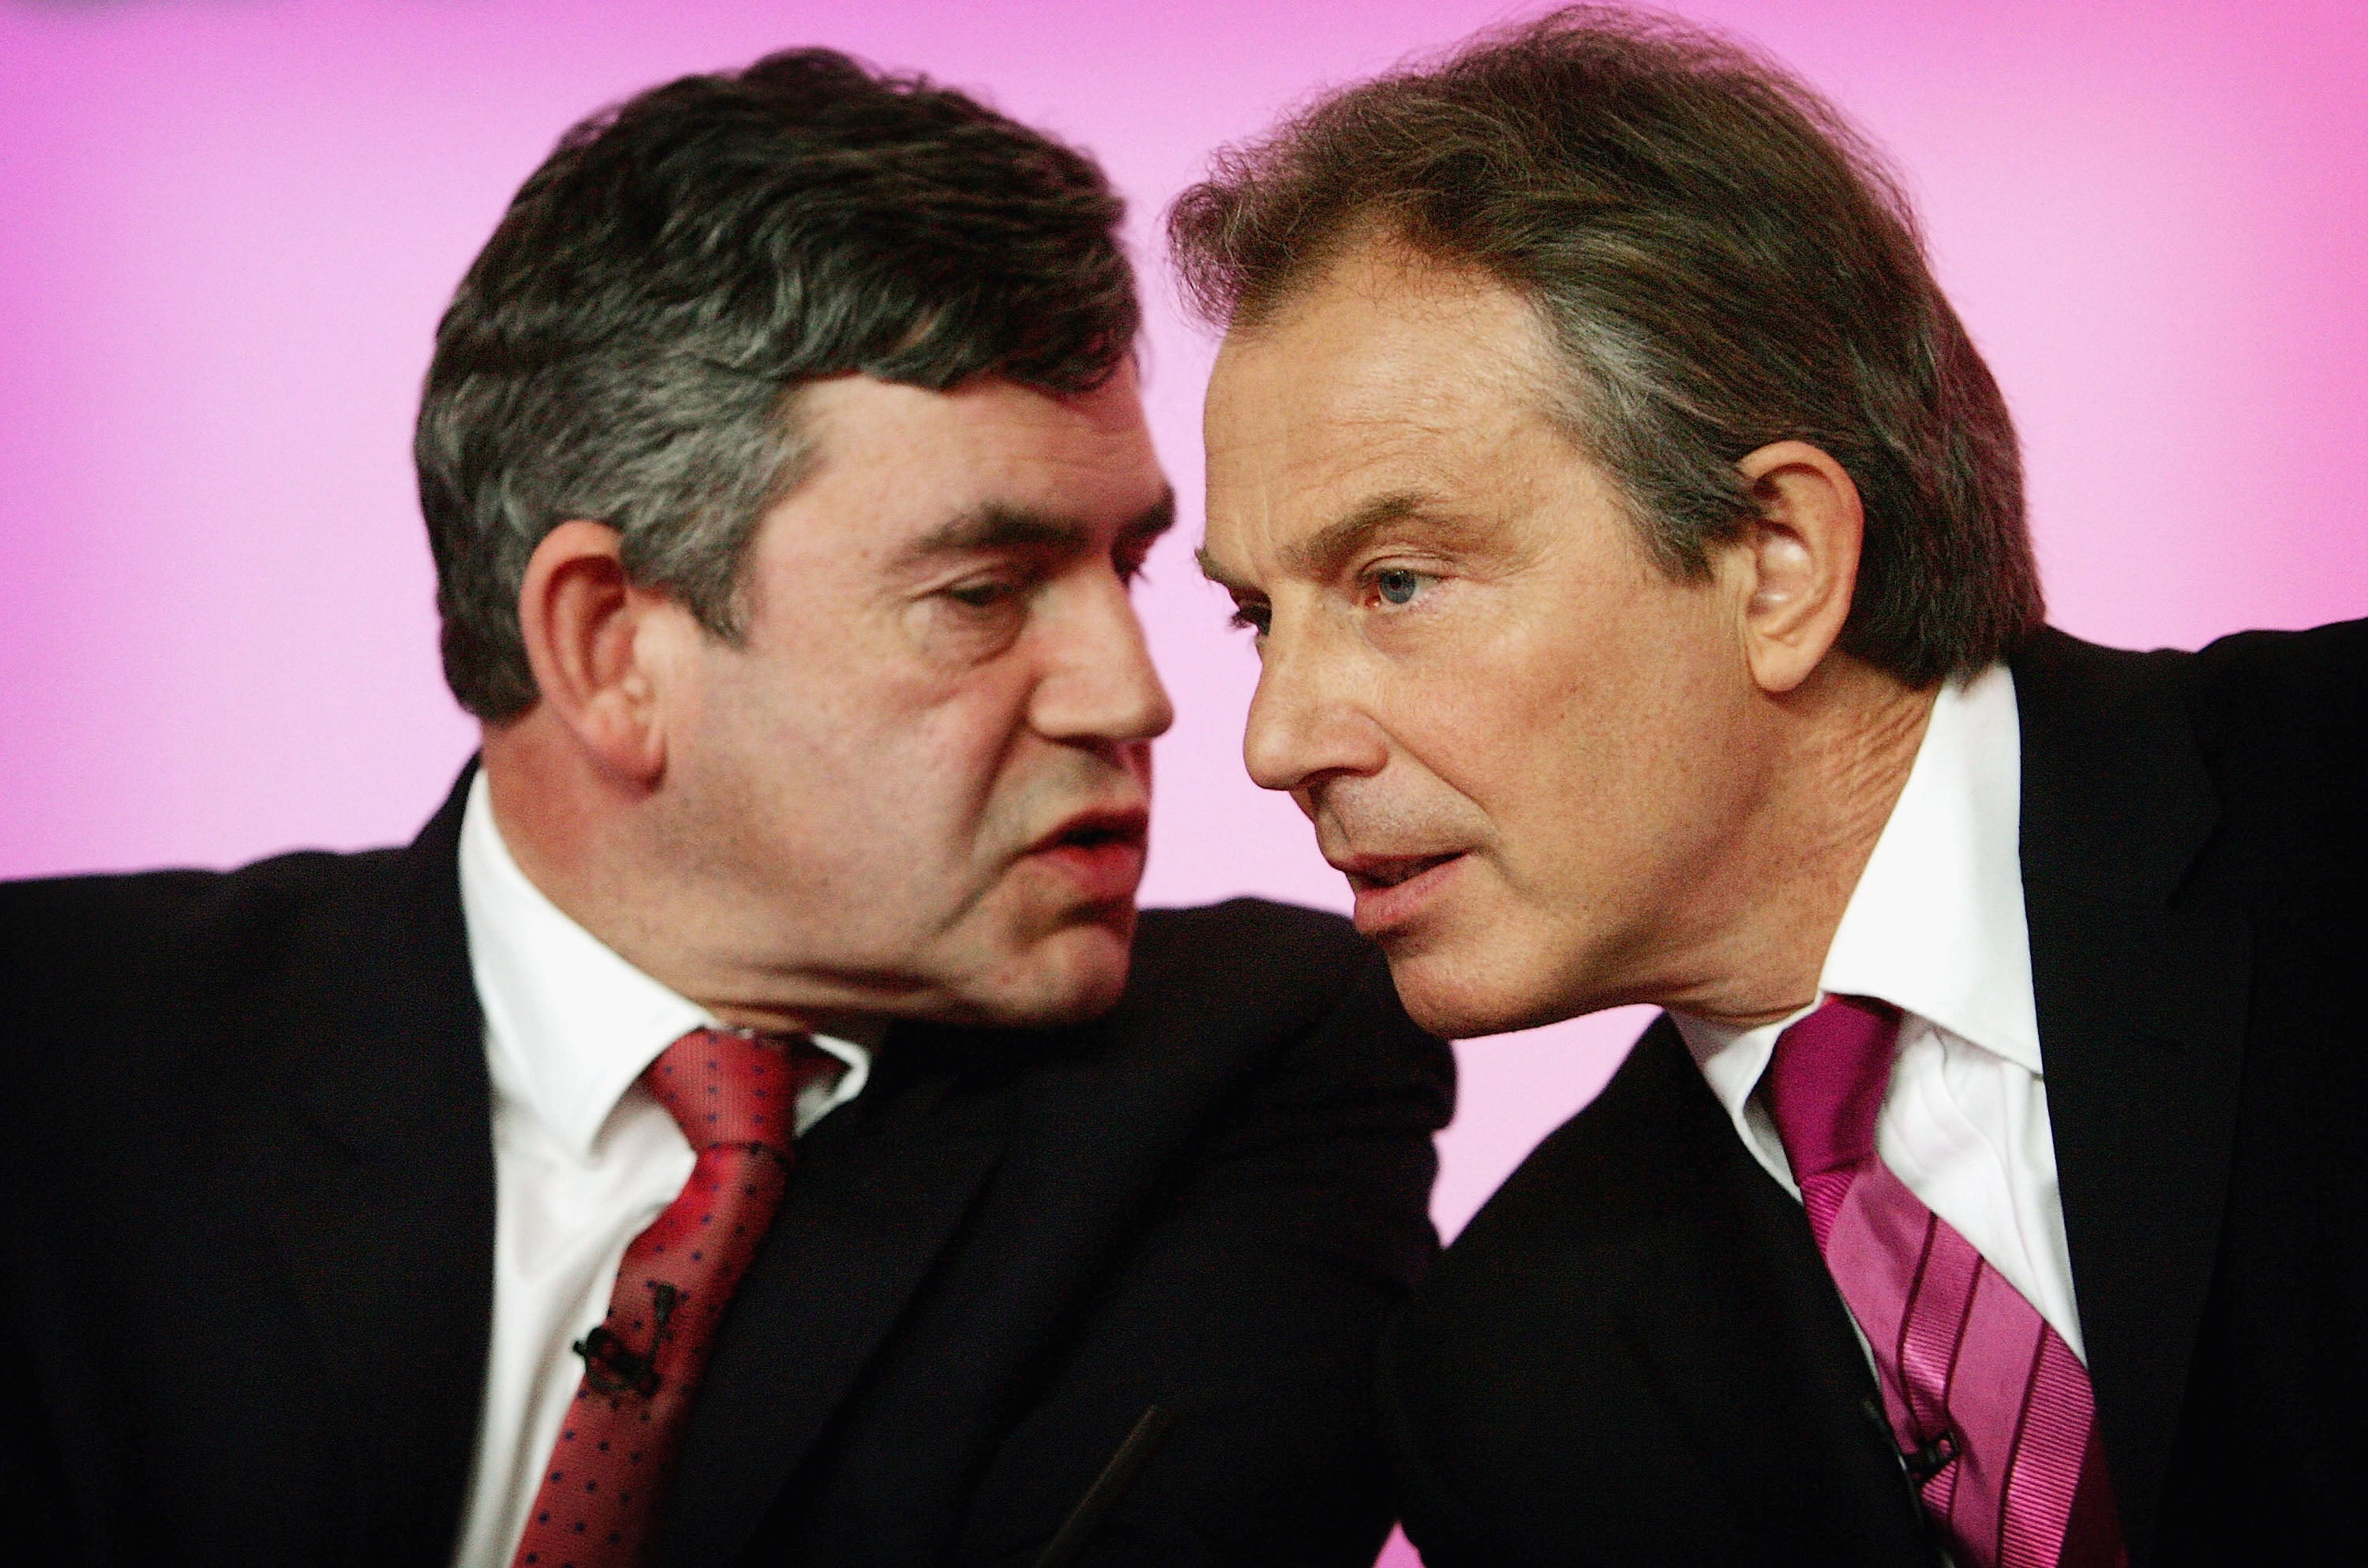 The TB-GBs: the tension between Blair and Brown often led to better decisions